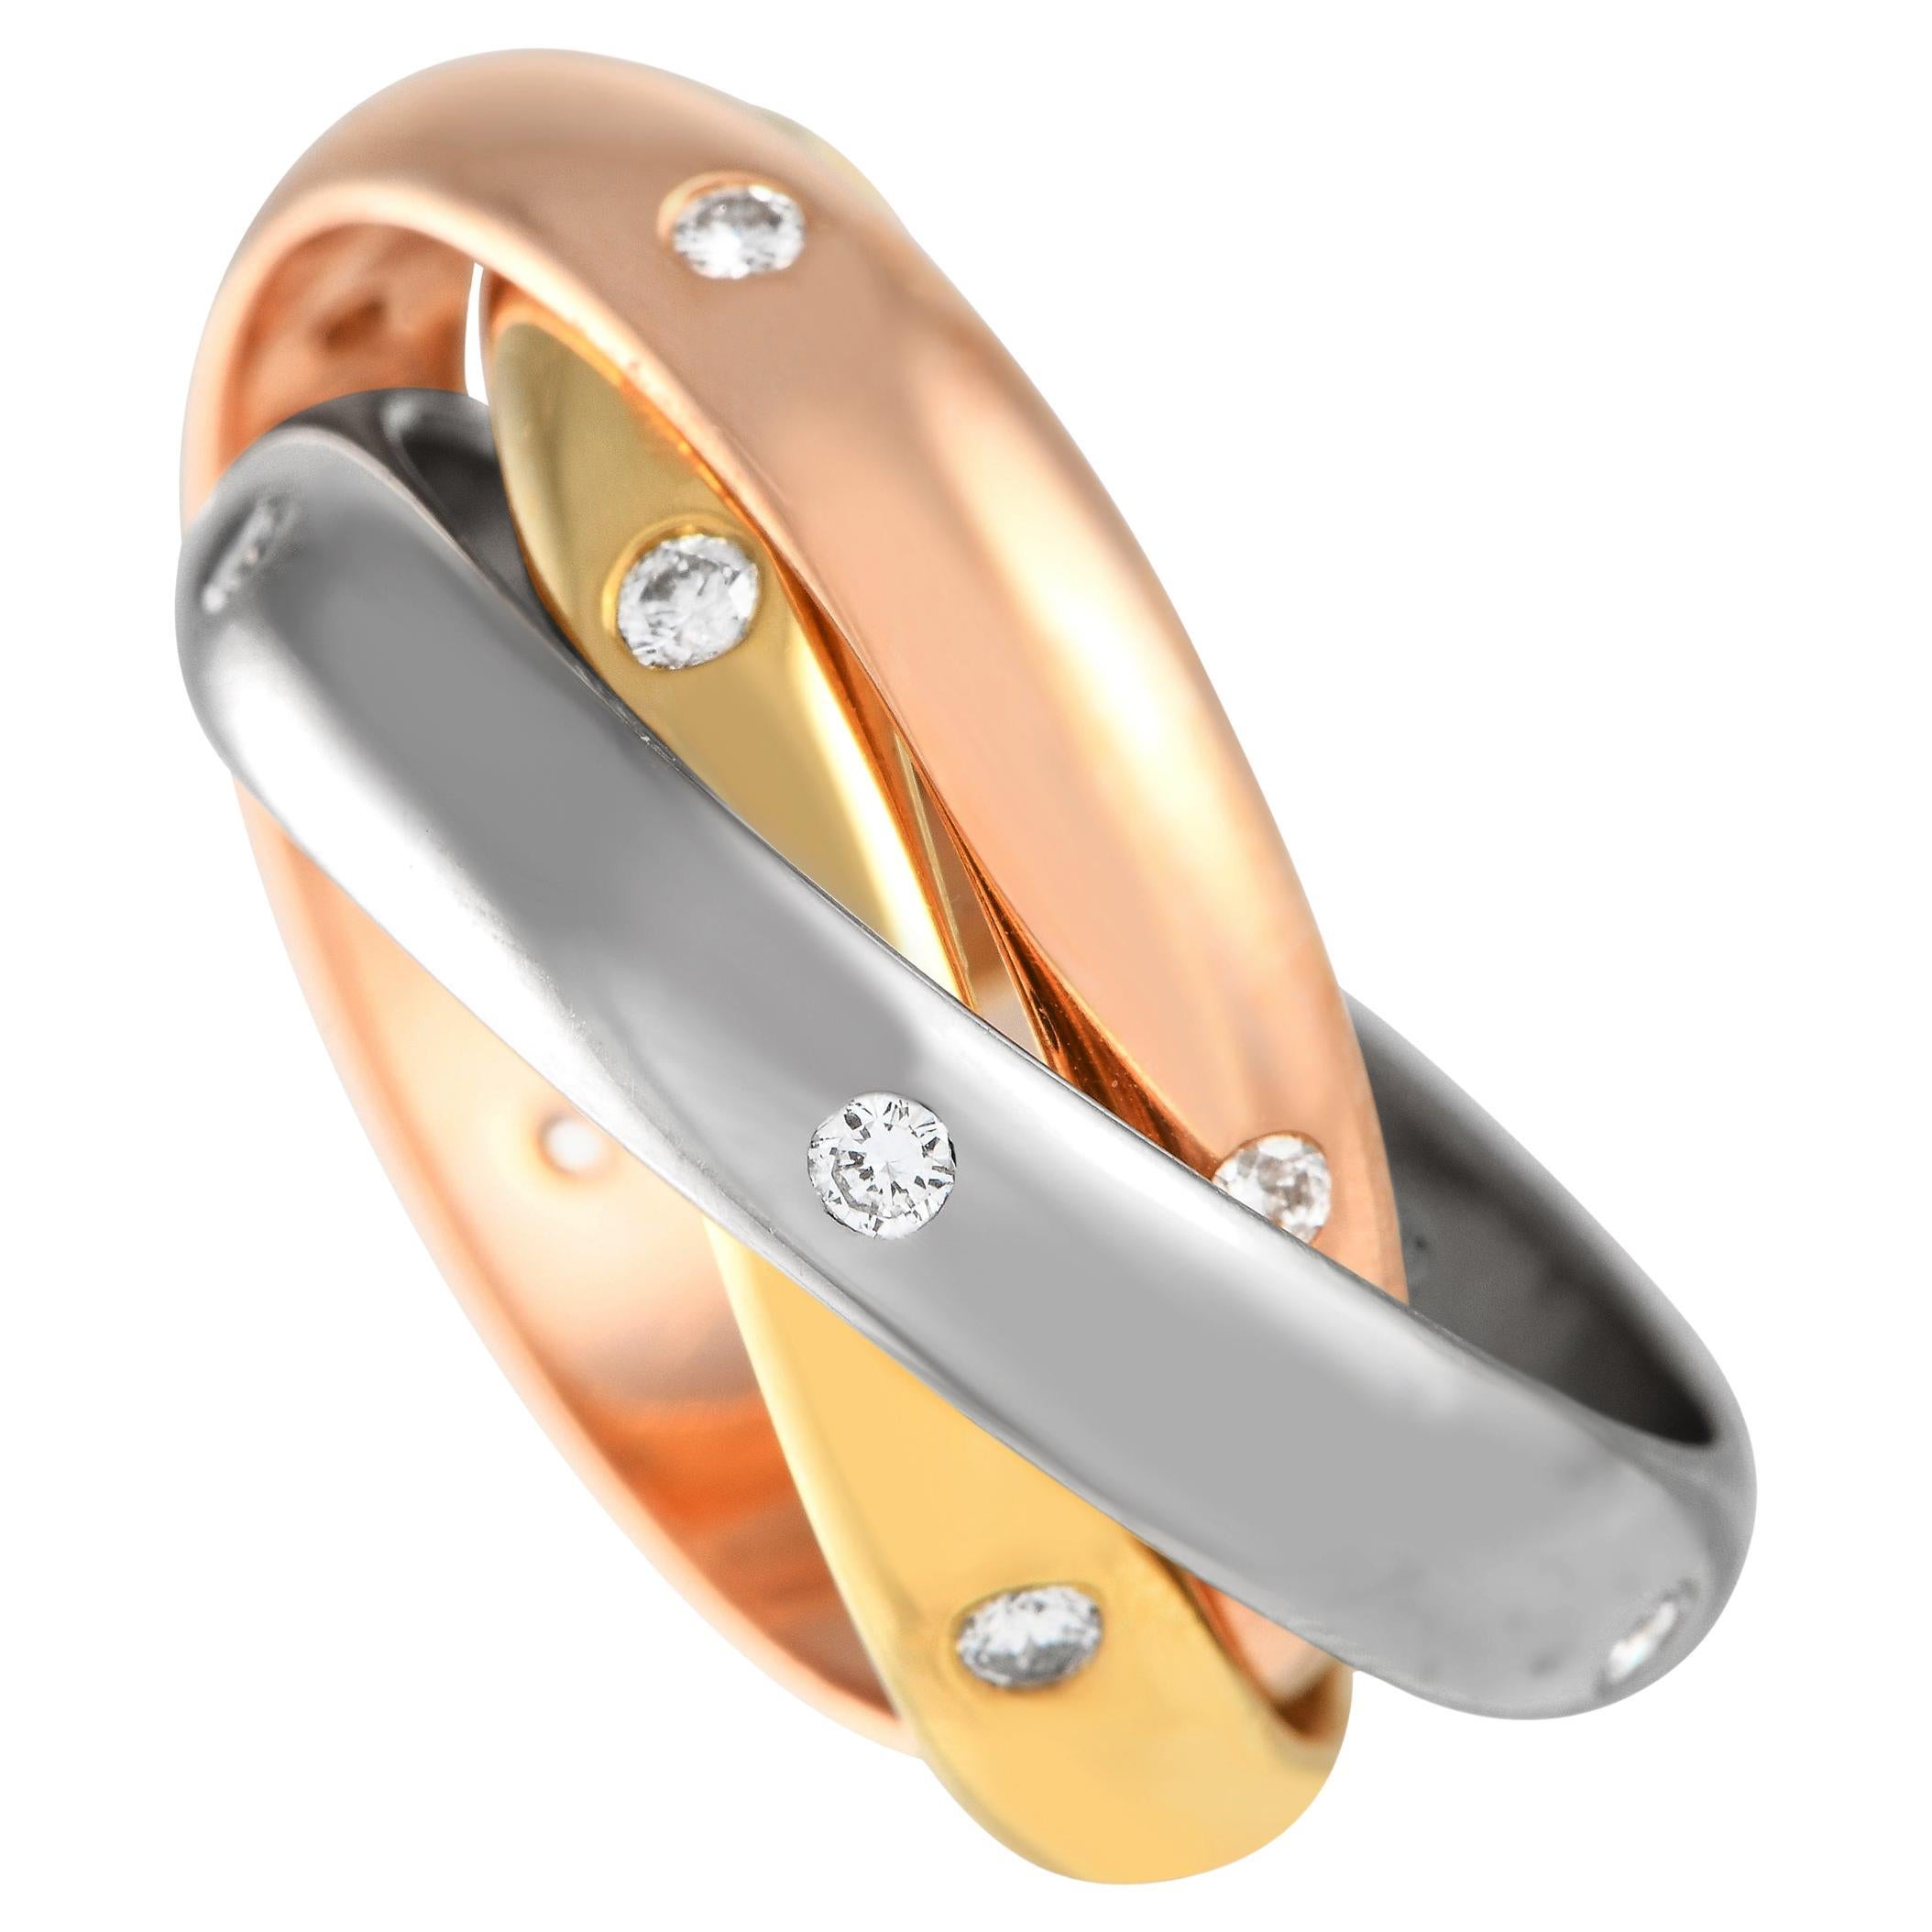 Cartier Constellation 18K Rose, White, and Yellow Gold Ring